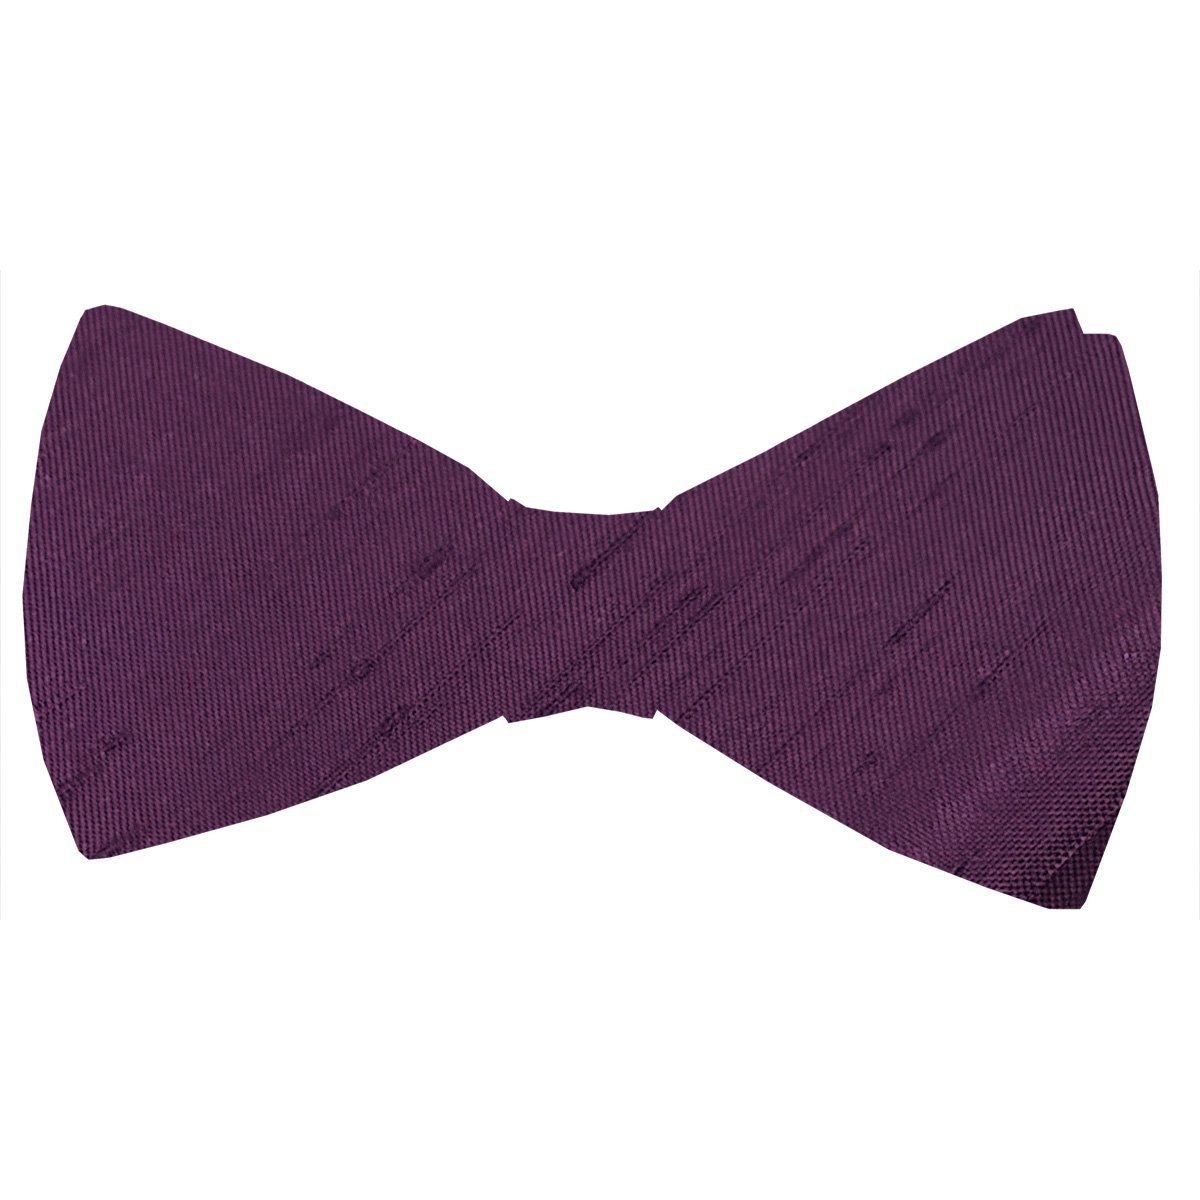 Elderberry Shantung Bow Ties - Wedding Bow Tie - Pre-Tied - Swagger & Swoon